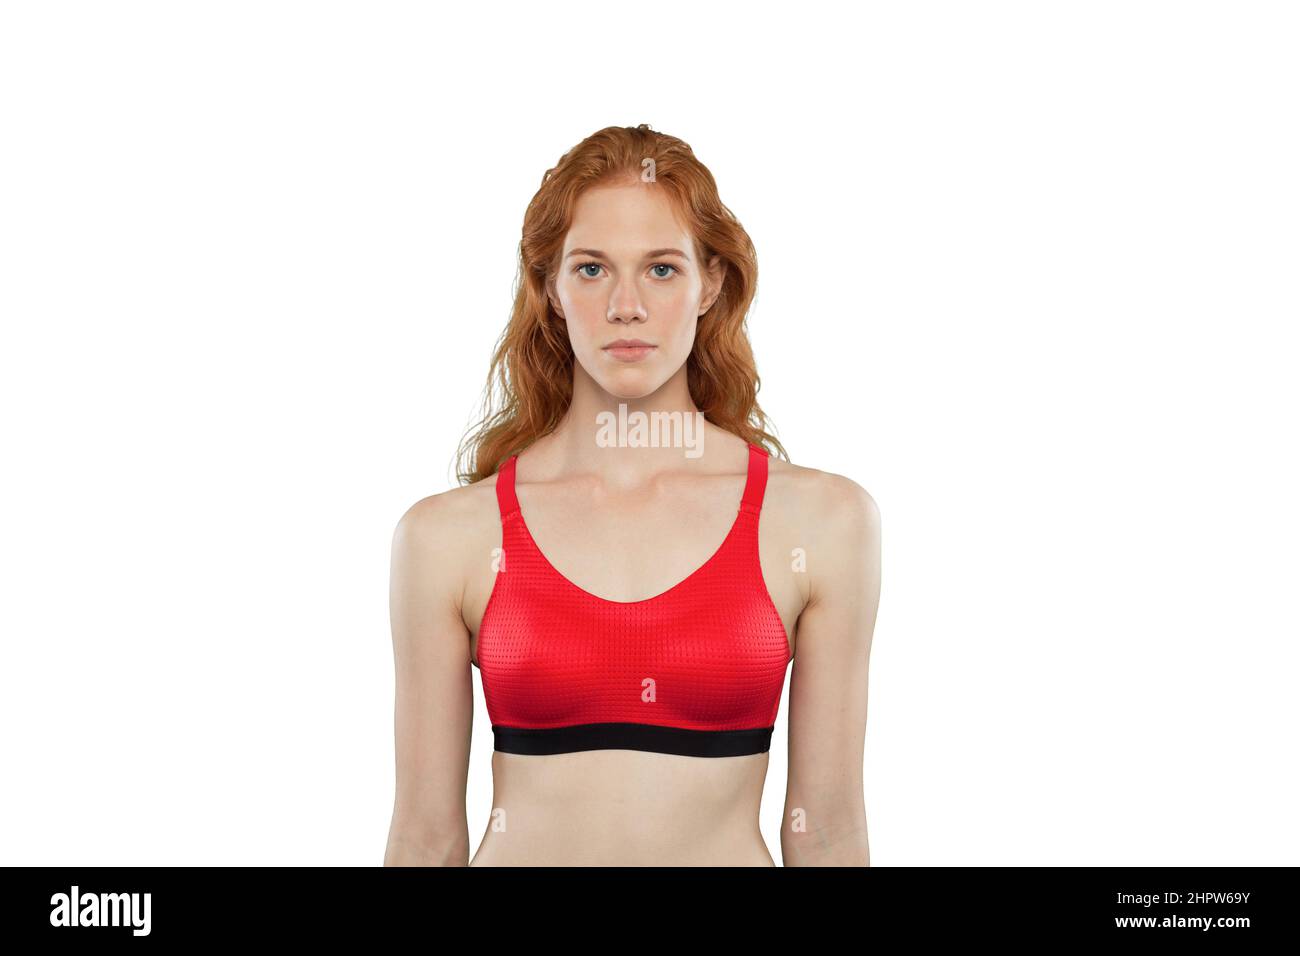 Female athlete poses on a white background. Studio portrait of woman wearing red sporty tank top. Woman in a calm pose Stock Photo